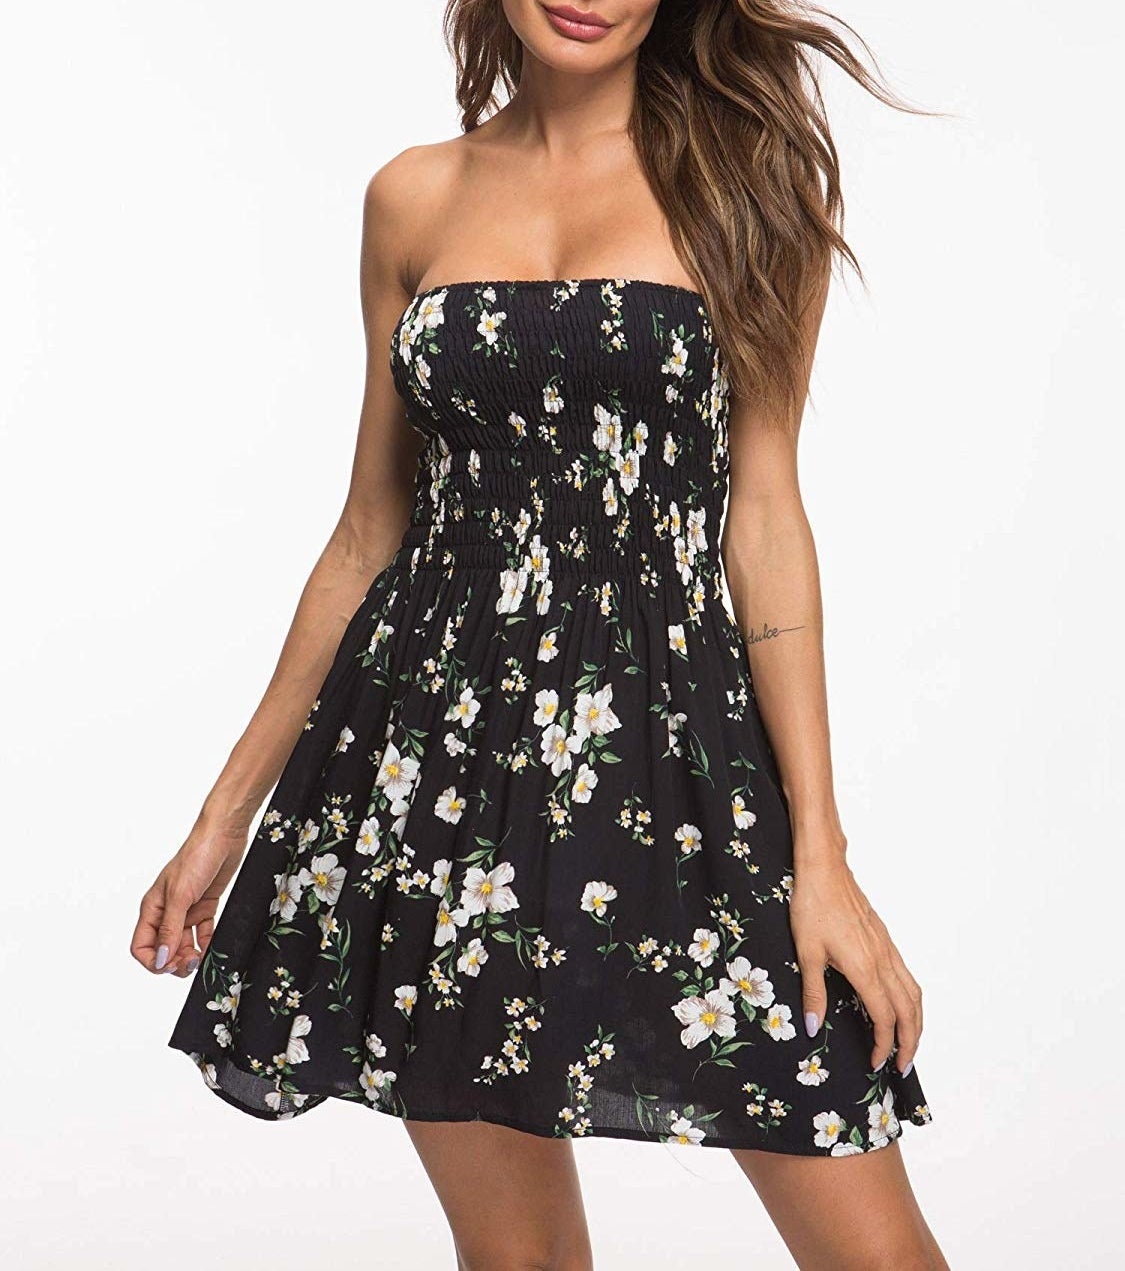 59 Super Cute Pieces Of Clothing You'll Wish You Added To Your Closet ...